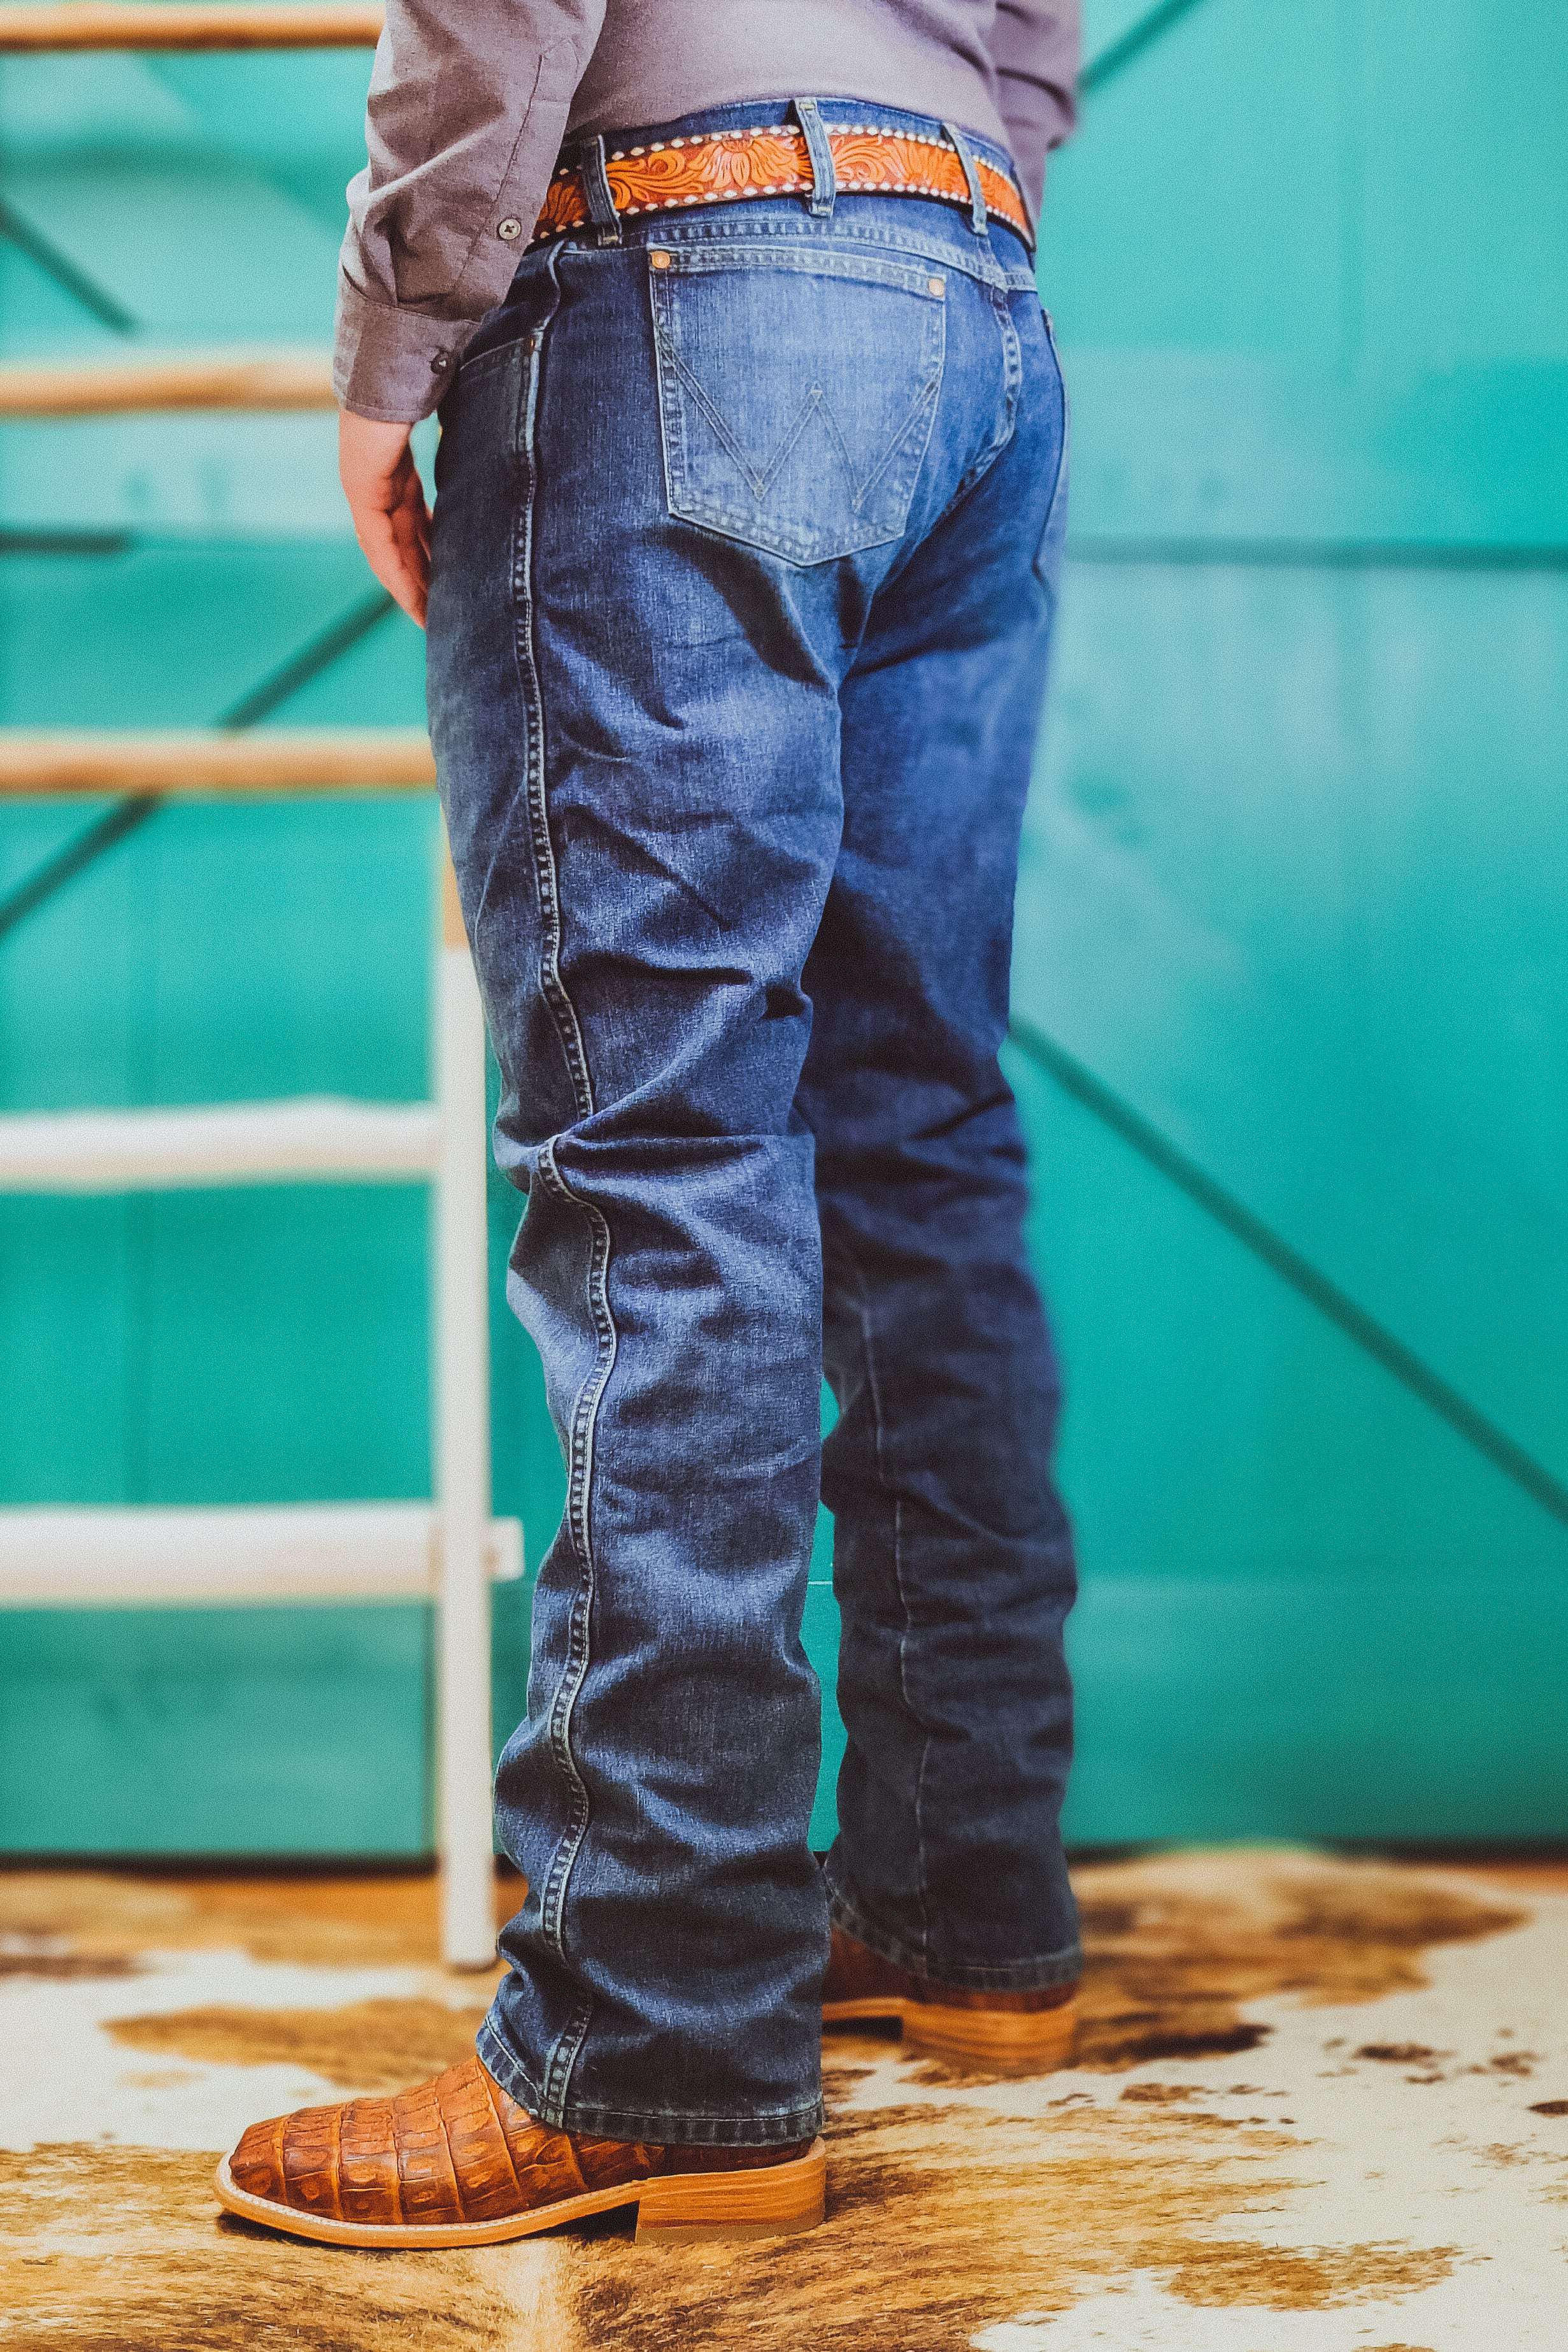 River Wash Slim Boot Jeans by Wrangler from The Gritty Cowboy